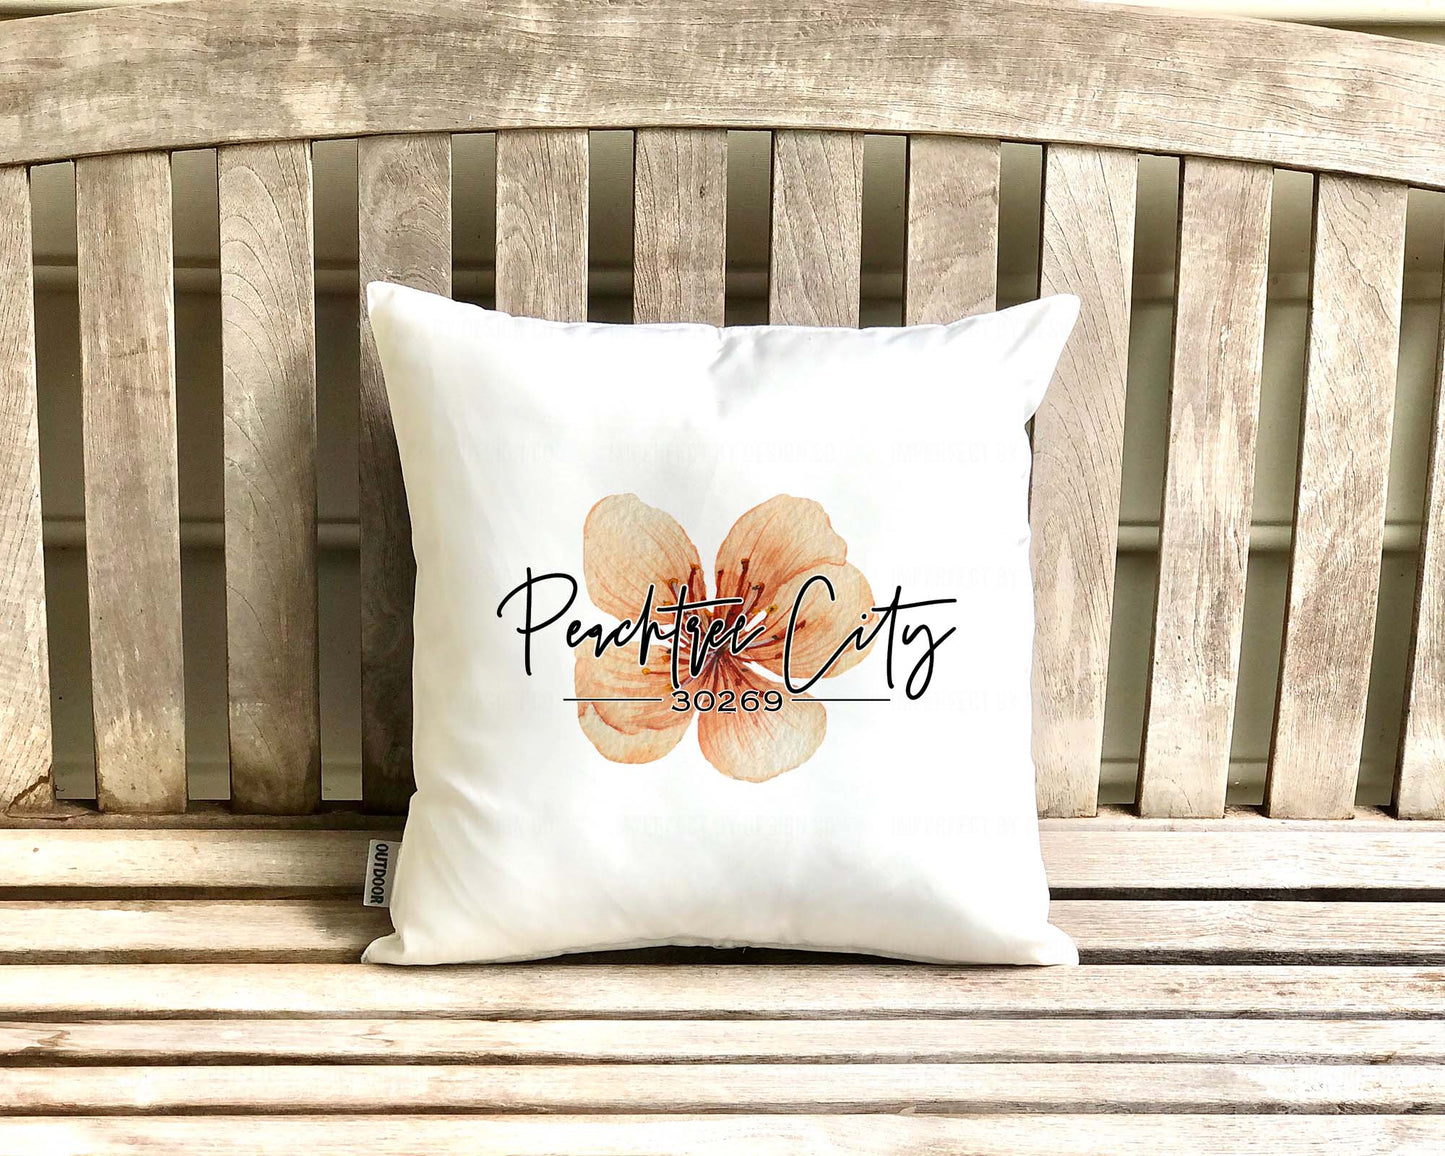 White Outdoor Pillow with Peach Blossom Graphic and Zip Code 30269 | imperfect by design co